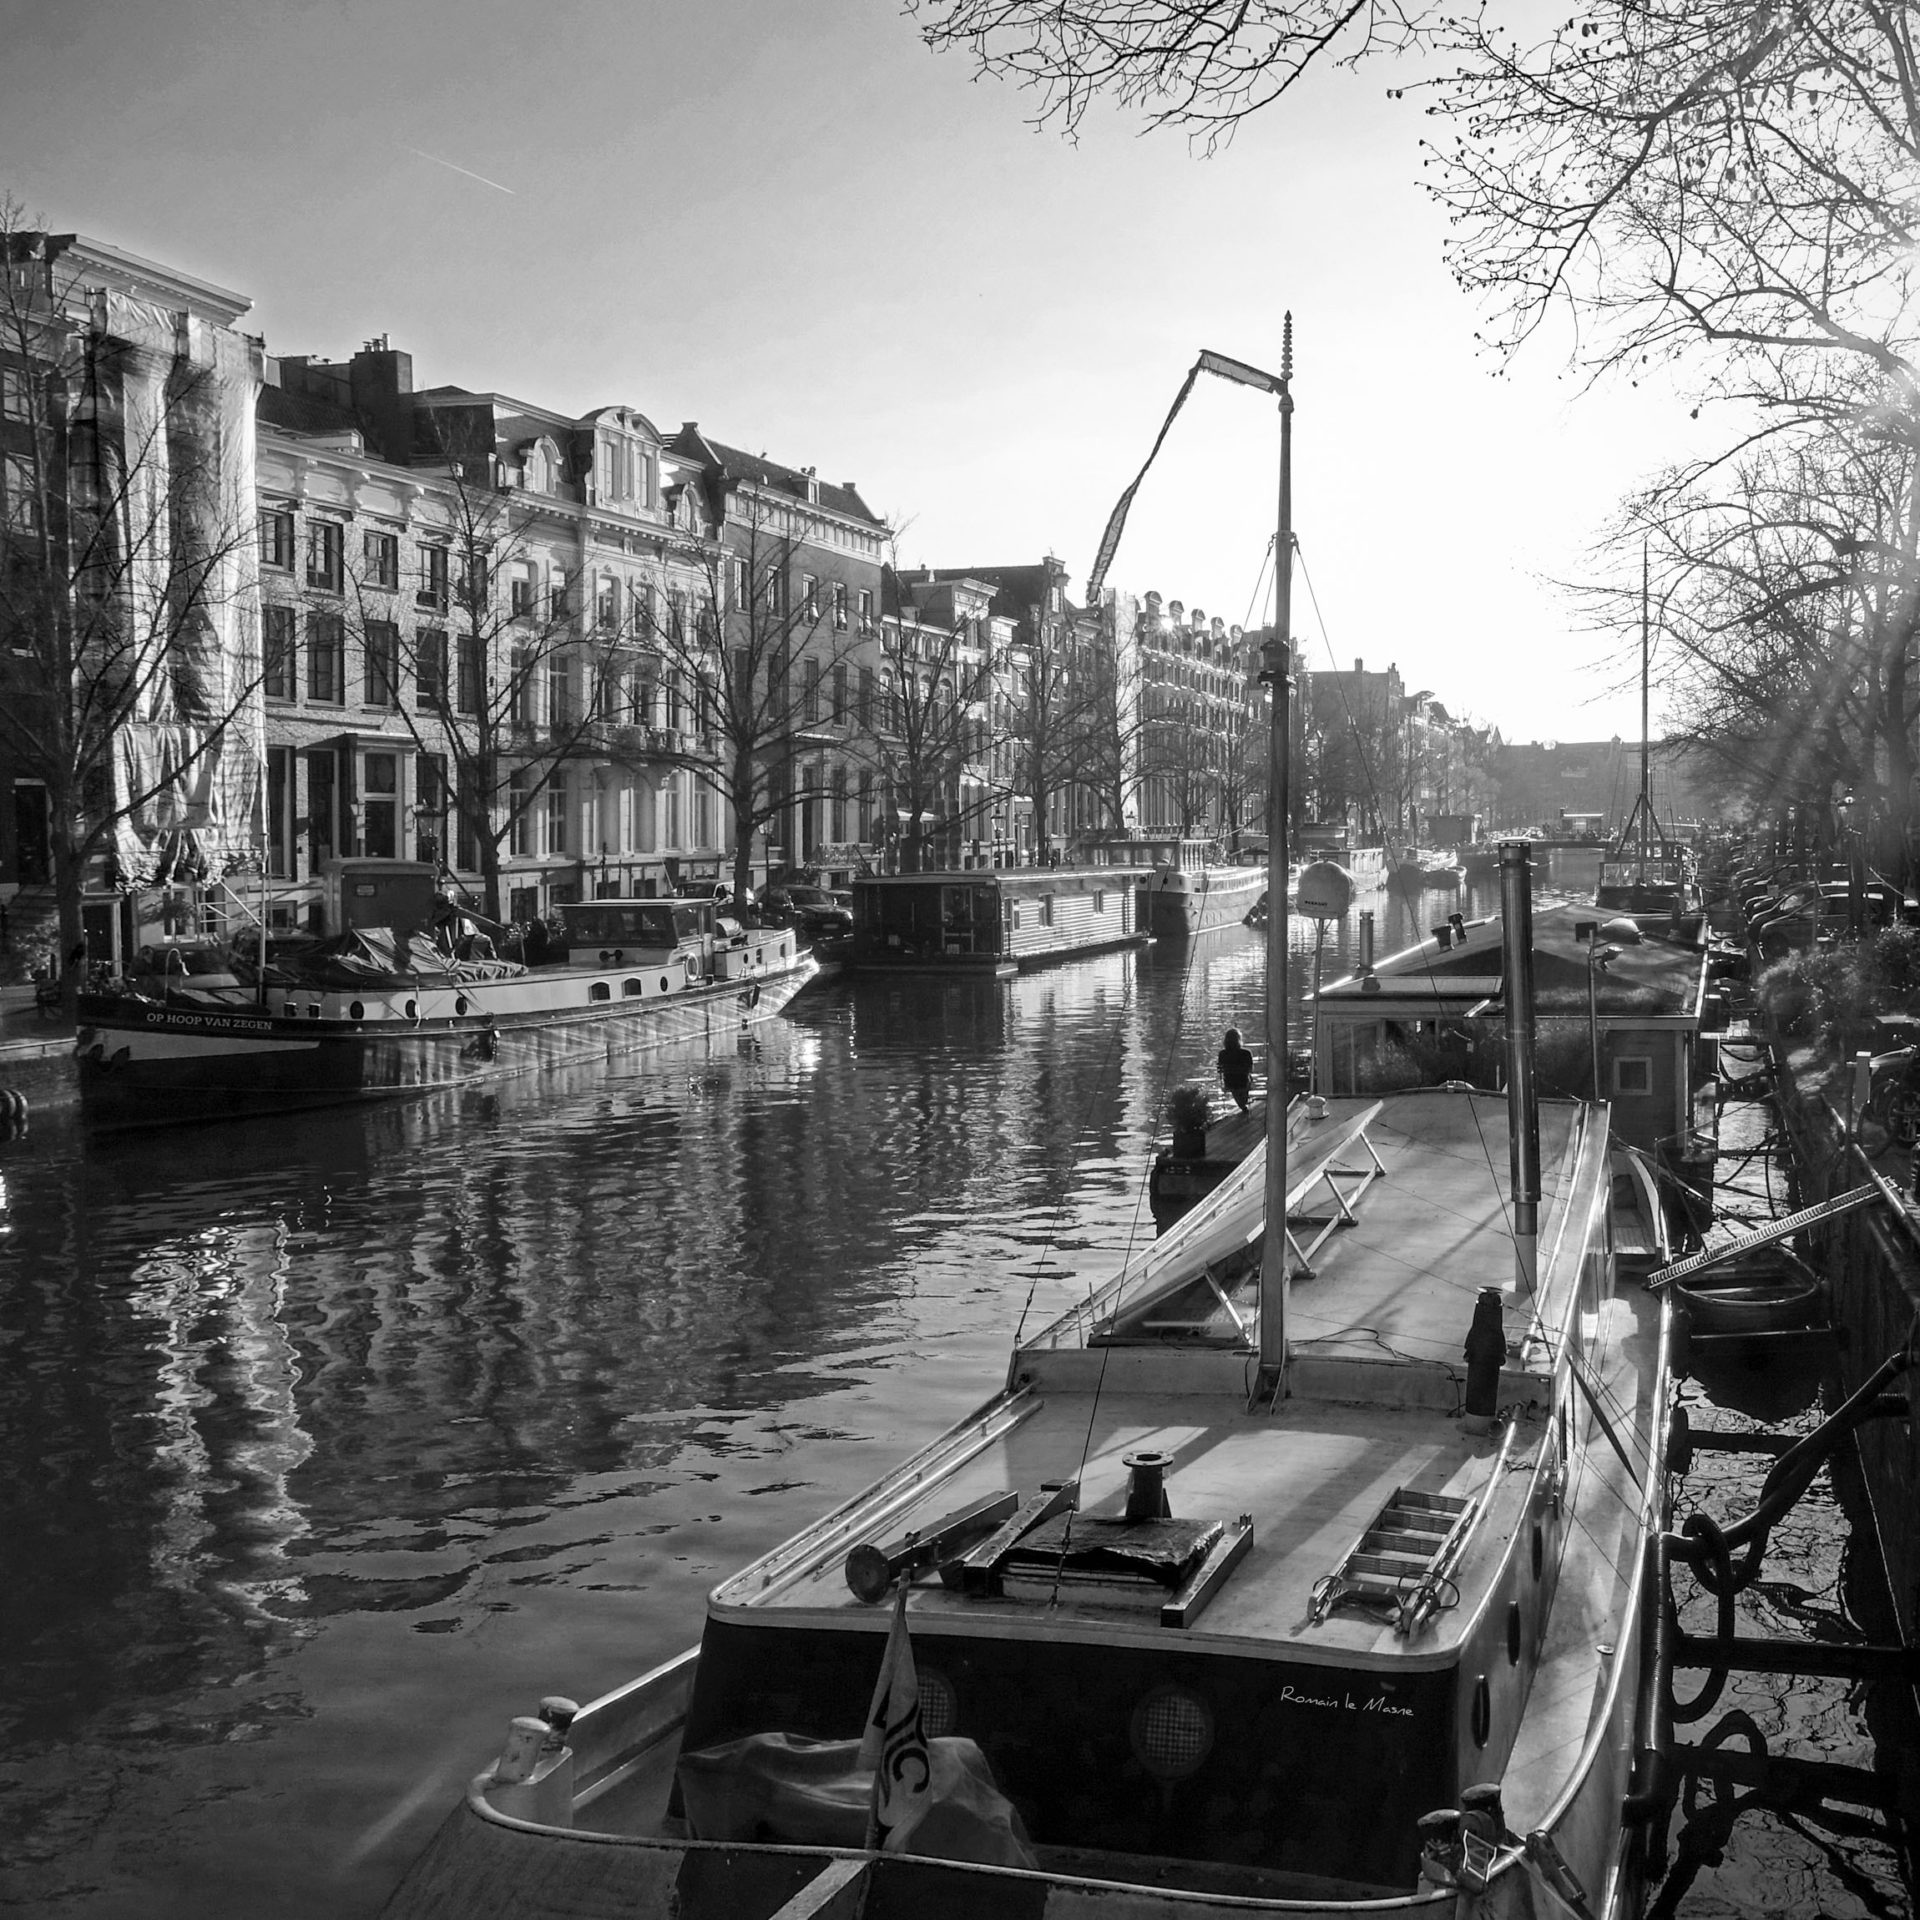 Back light on the canal - Amsterdam - Apr17 (1x1)